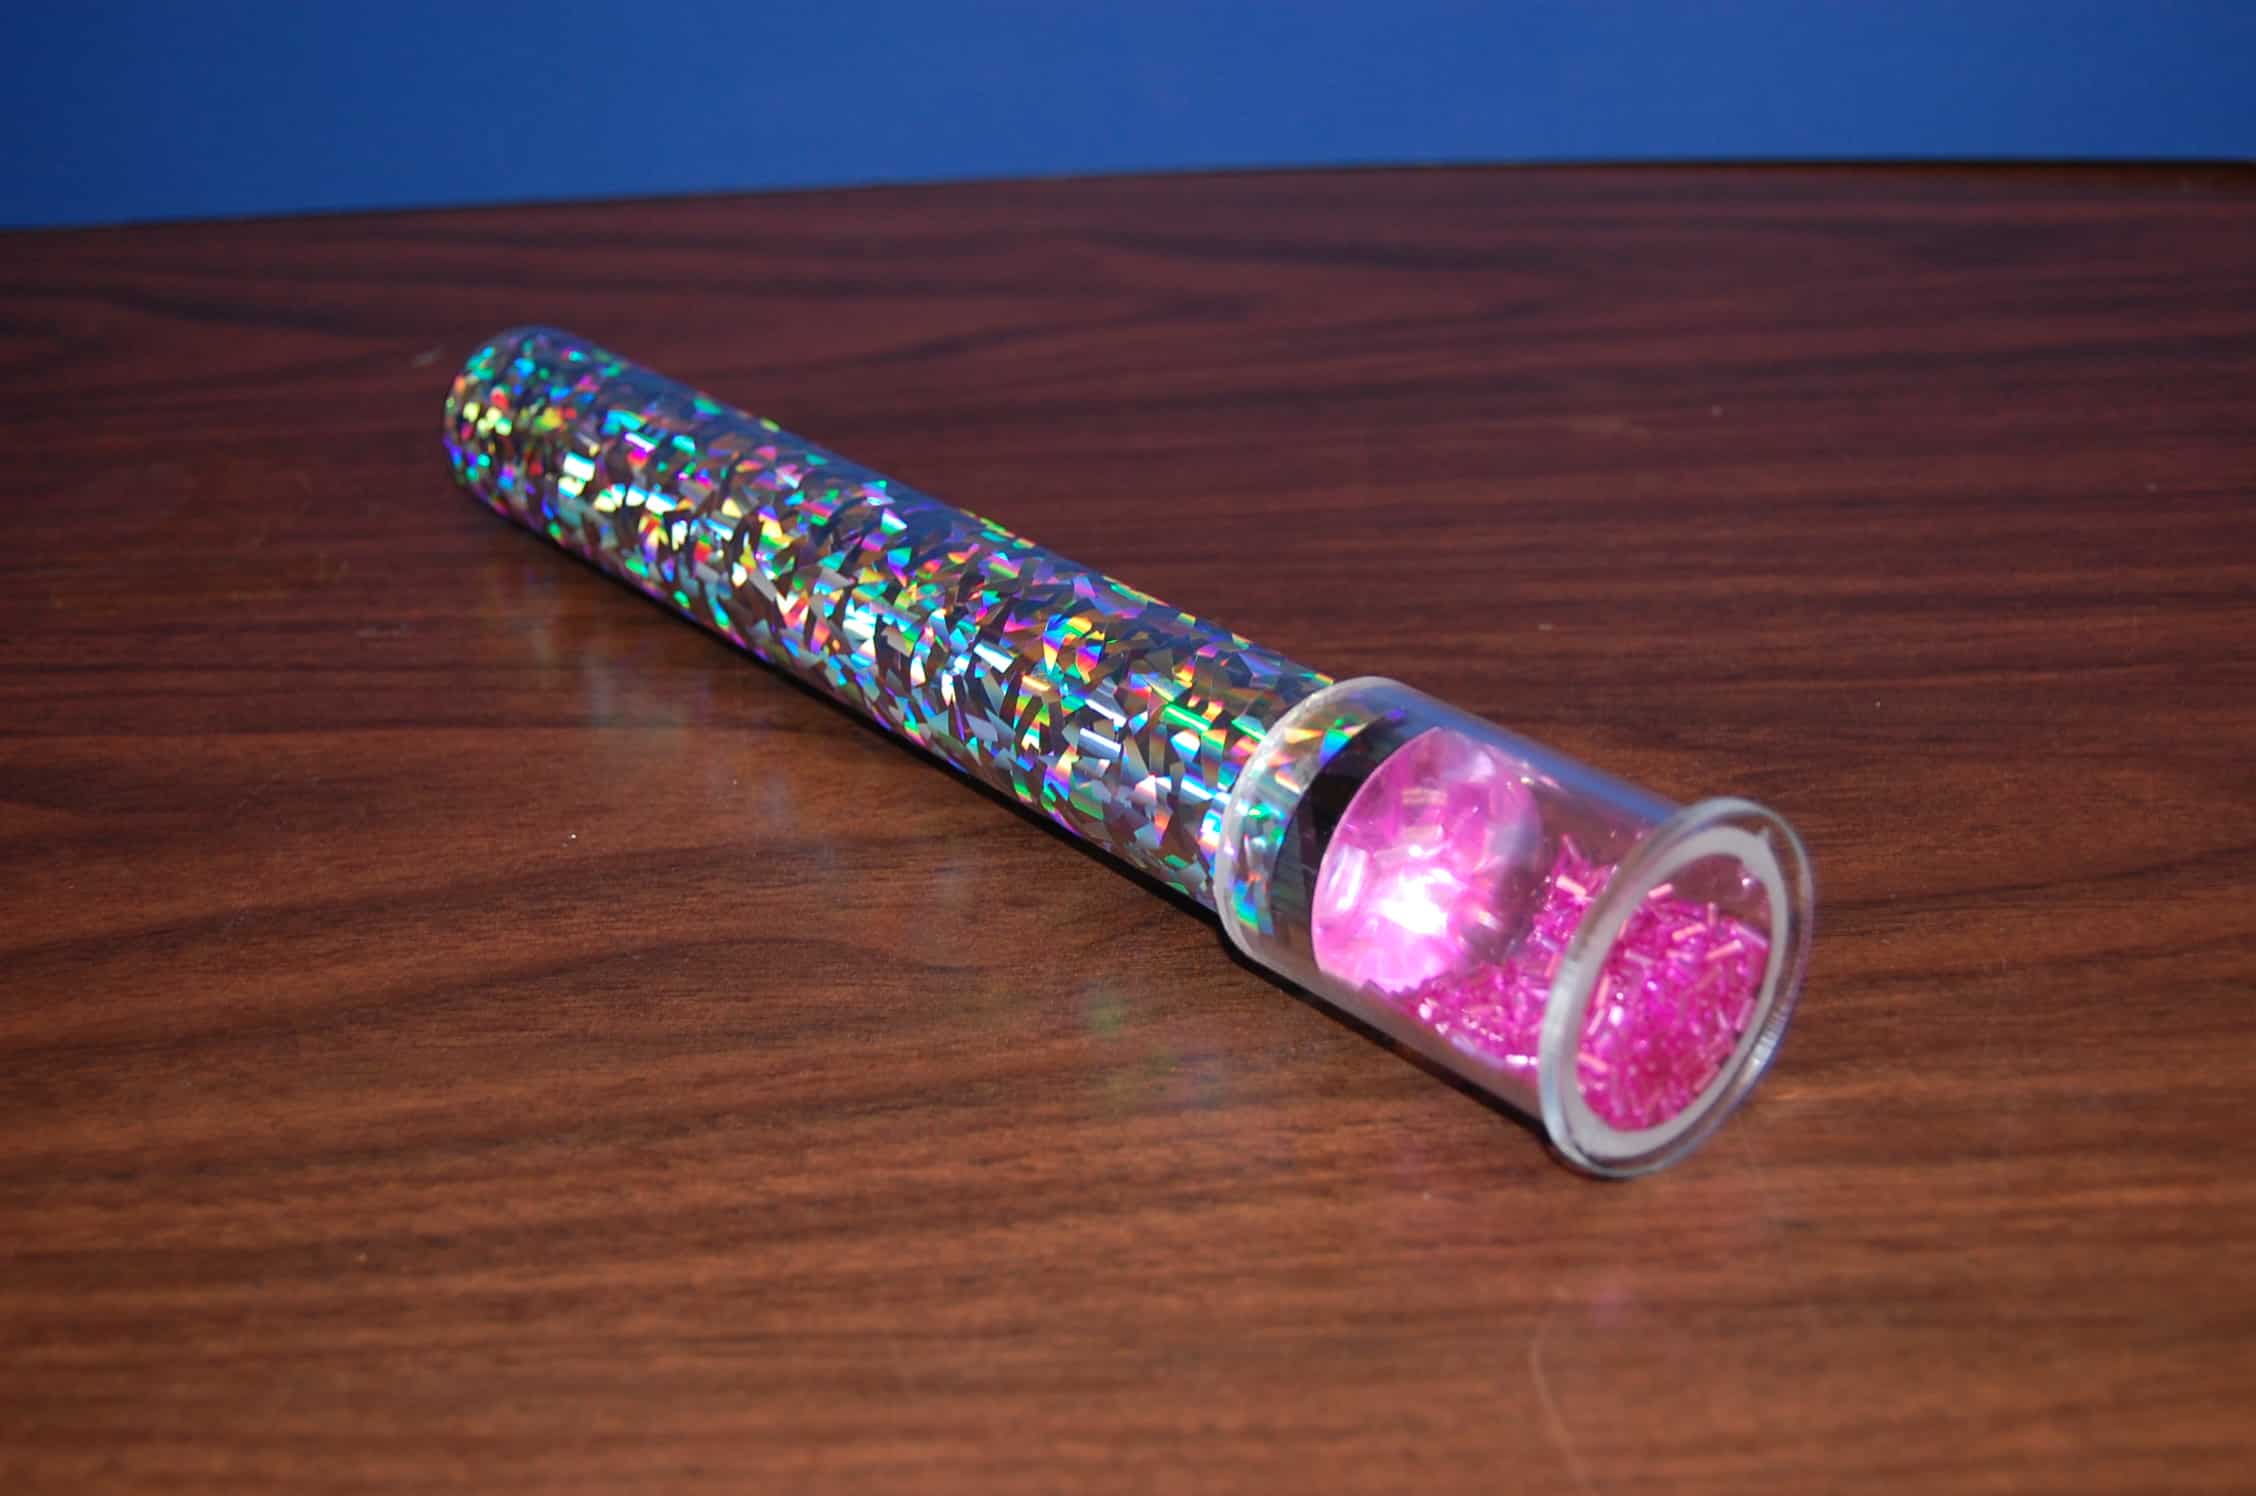 Acrylic and pvc pipe kaleidoscope with sparkles